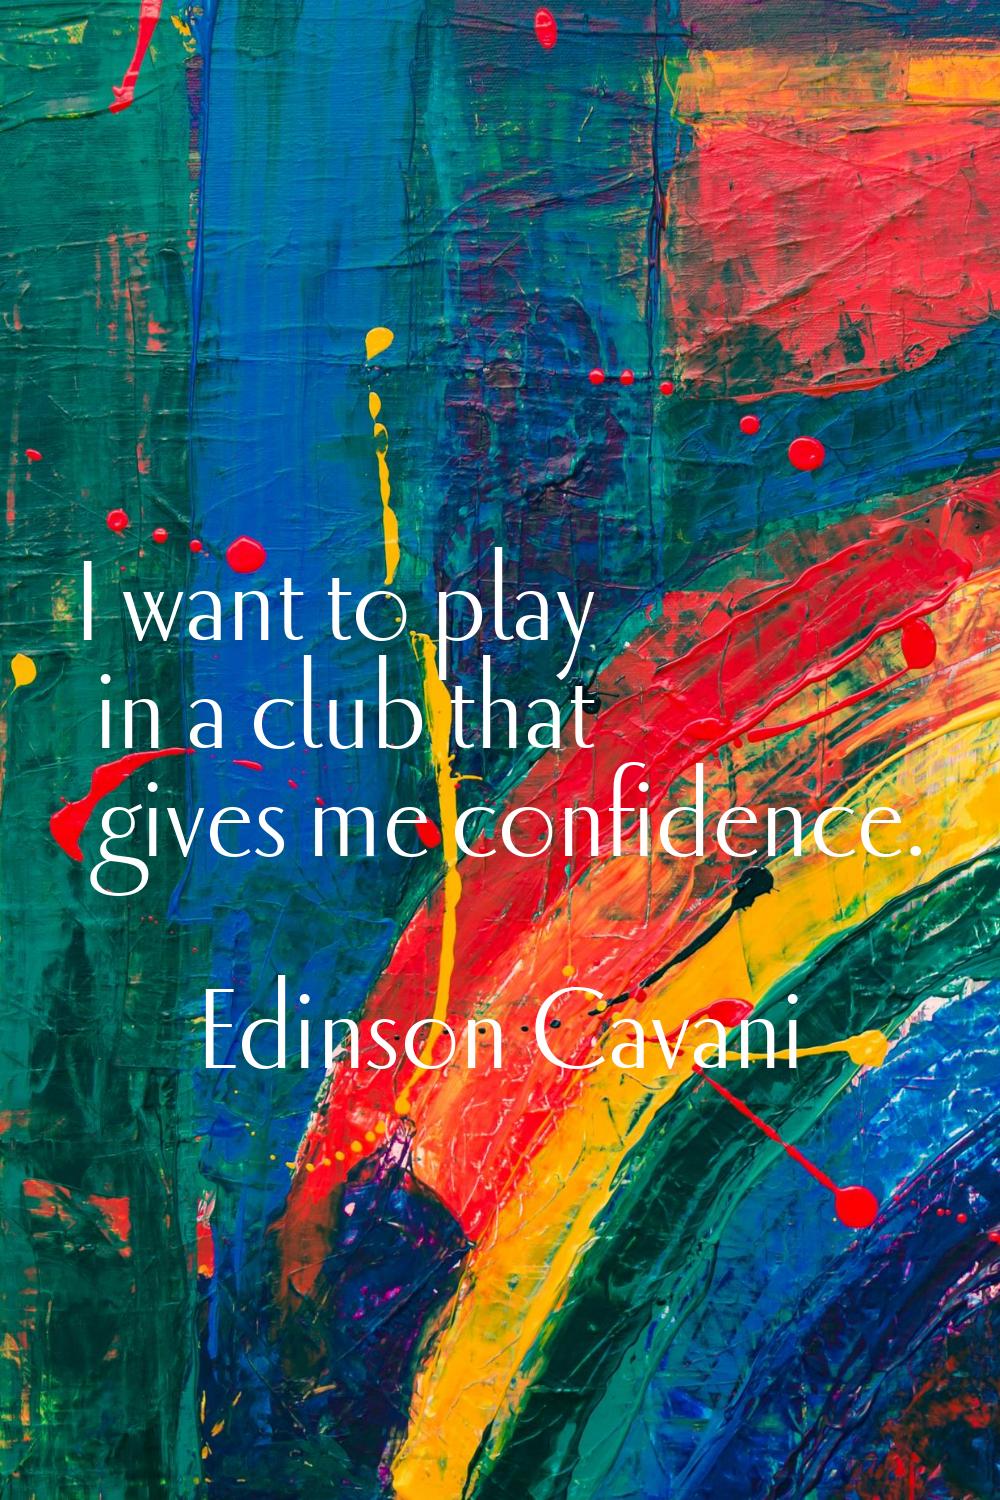 I want to play in a club that gives me confidence.